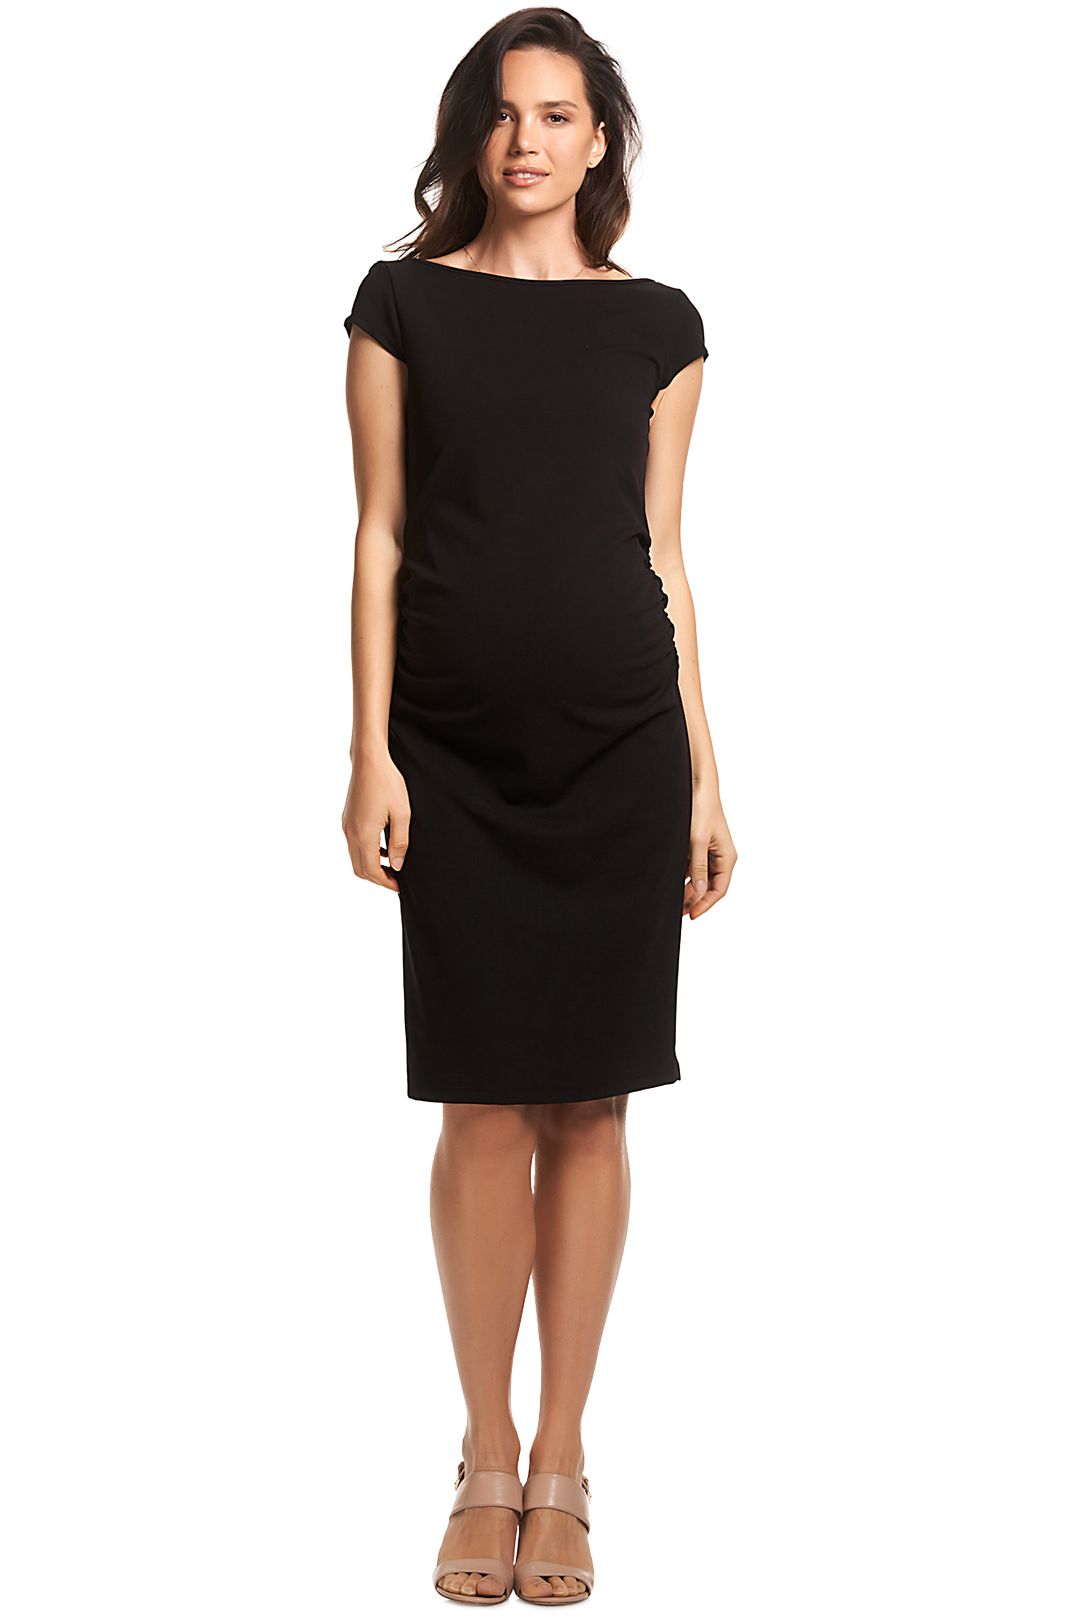 Leo Cap Sleeve Dress - Black by Soon Maternity for Hire